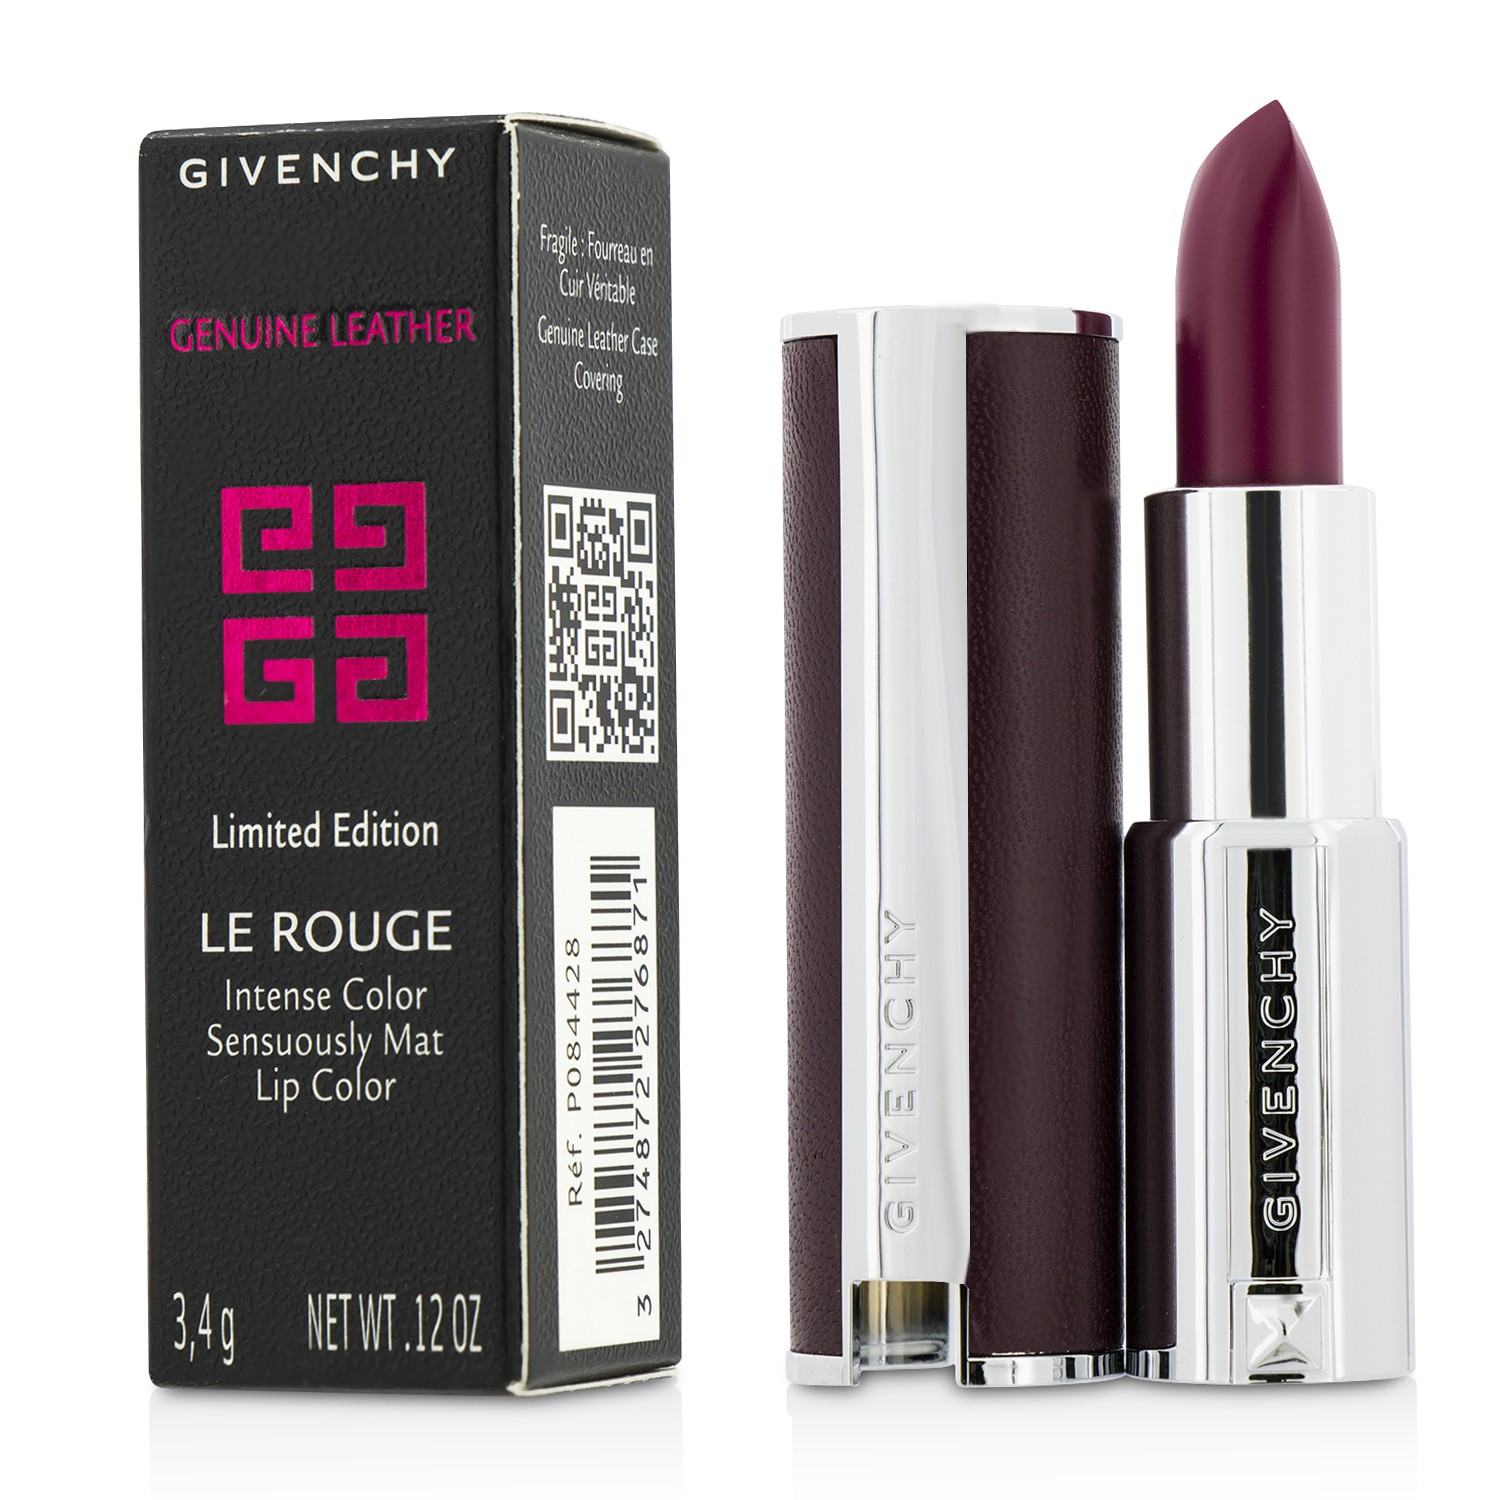 Le Rouge Intense Color Sensuously Mat Lipstick - # 315 Framboise Velours (Genuine Leather Case) Givenchy Image